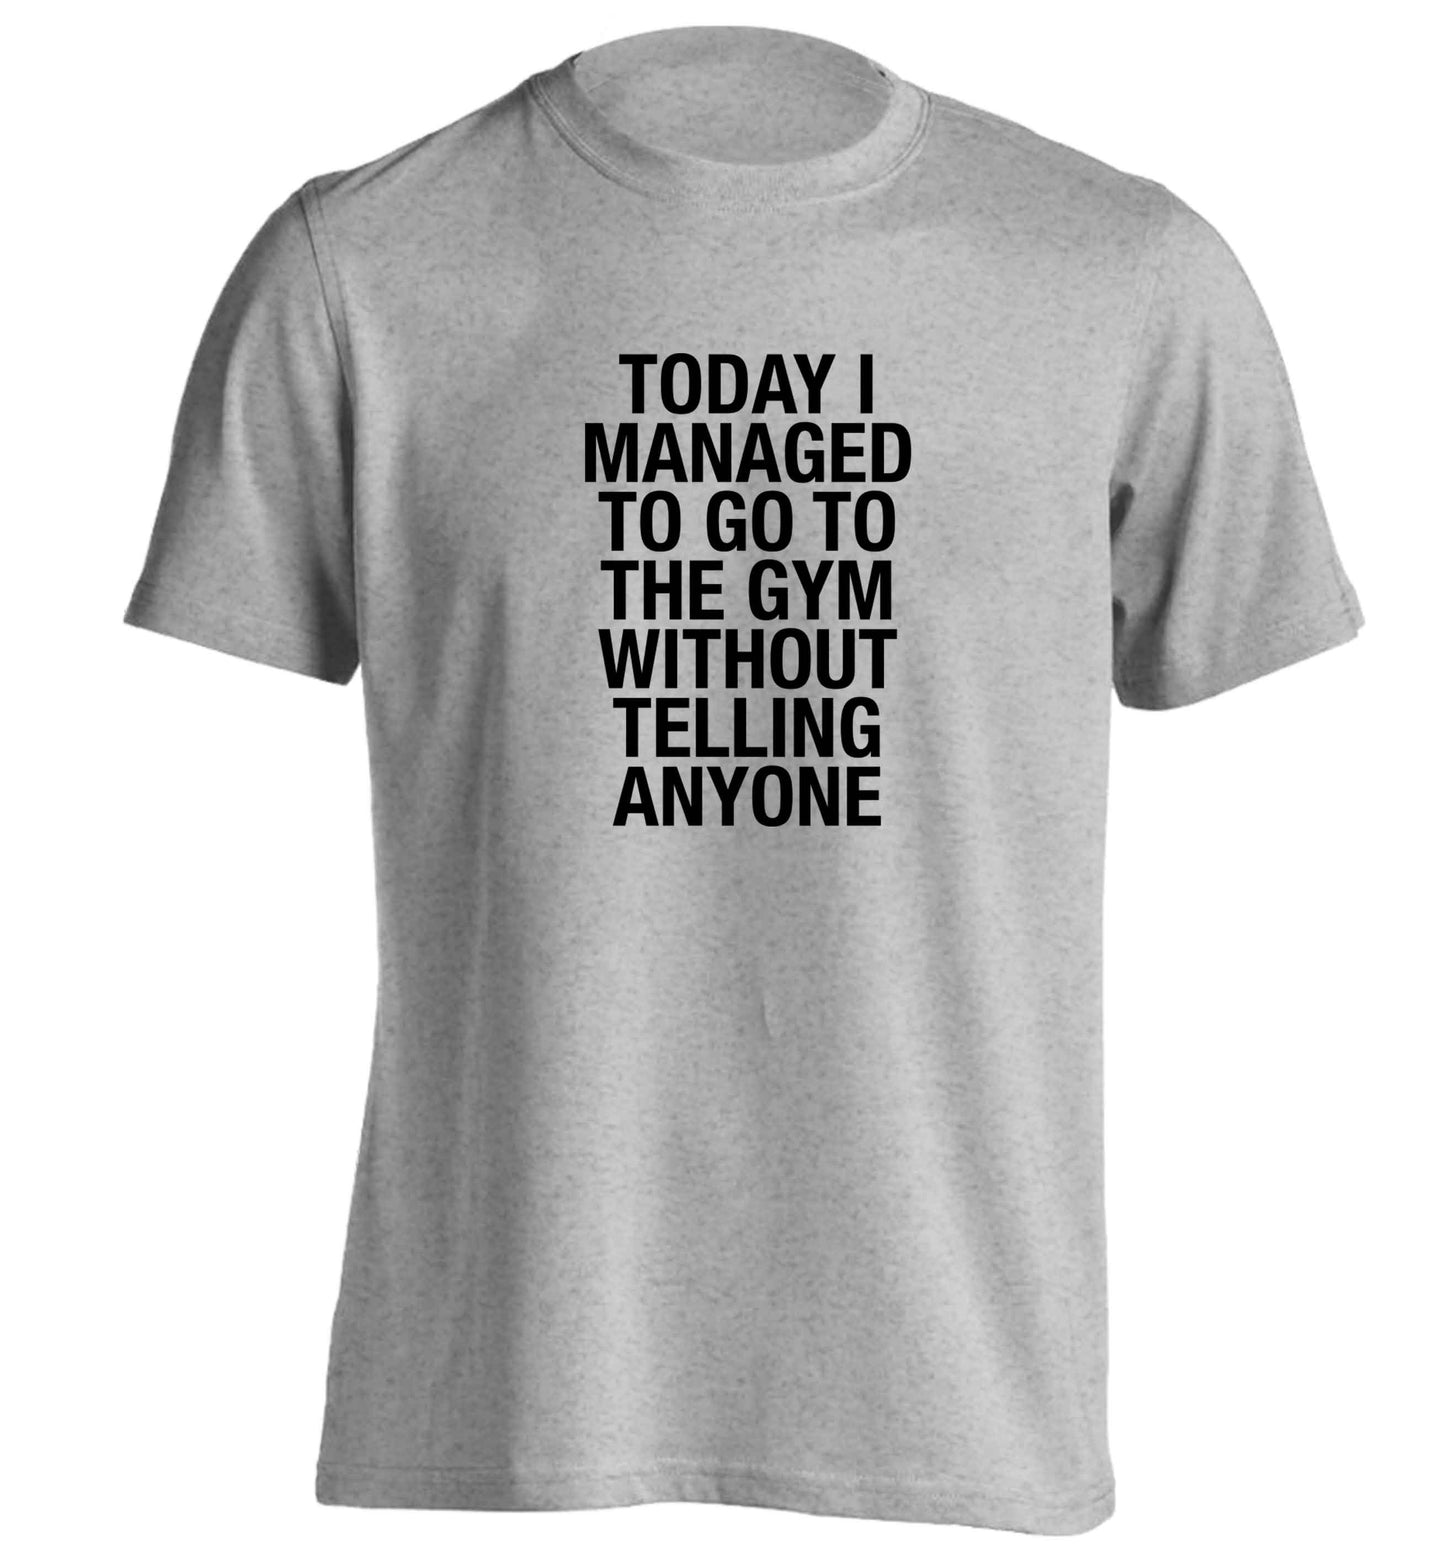 Today I managed to go to the gym without telling anyone adults unisex grey Tshirt 2XL